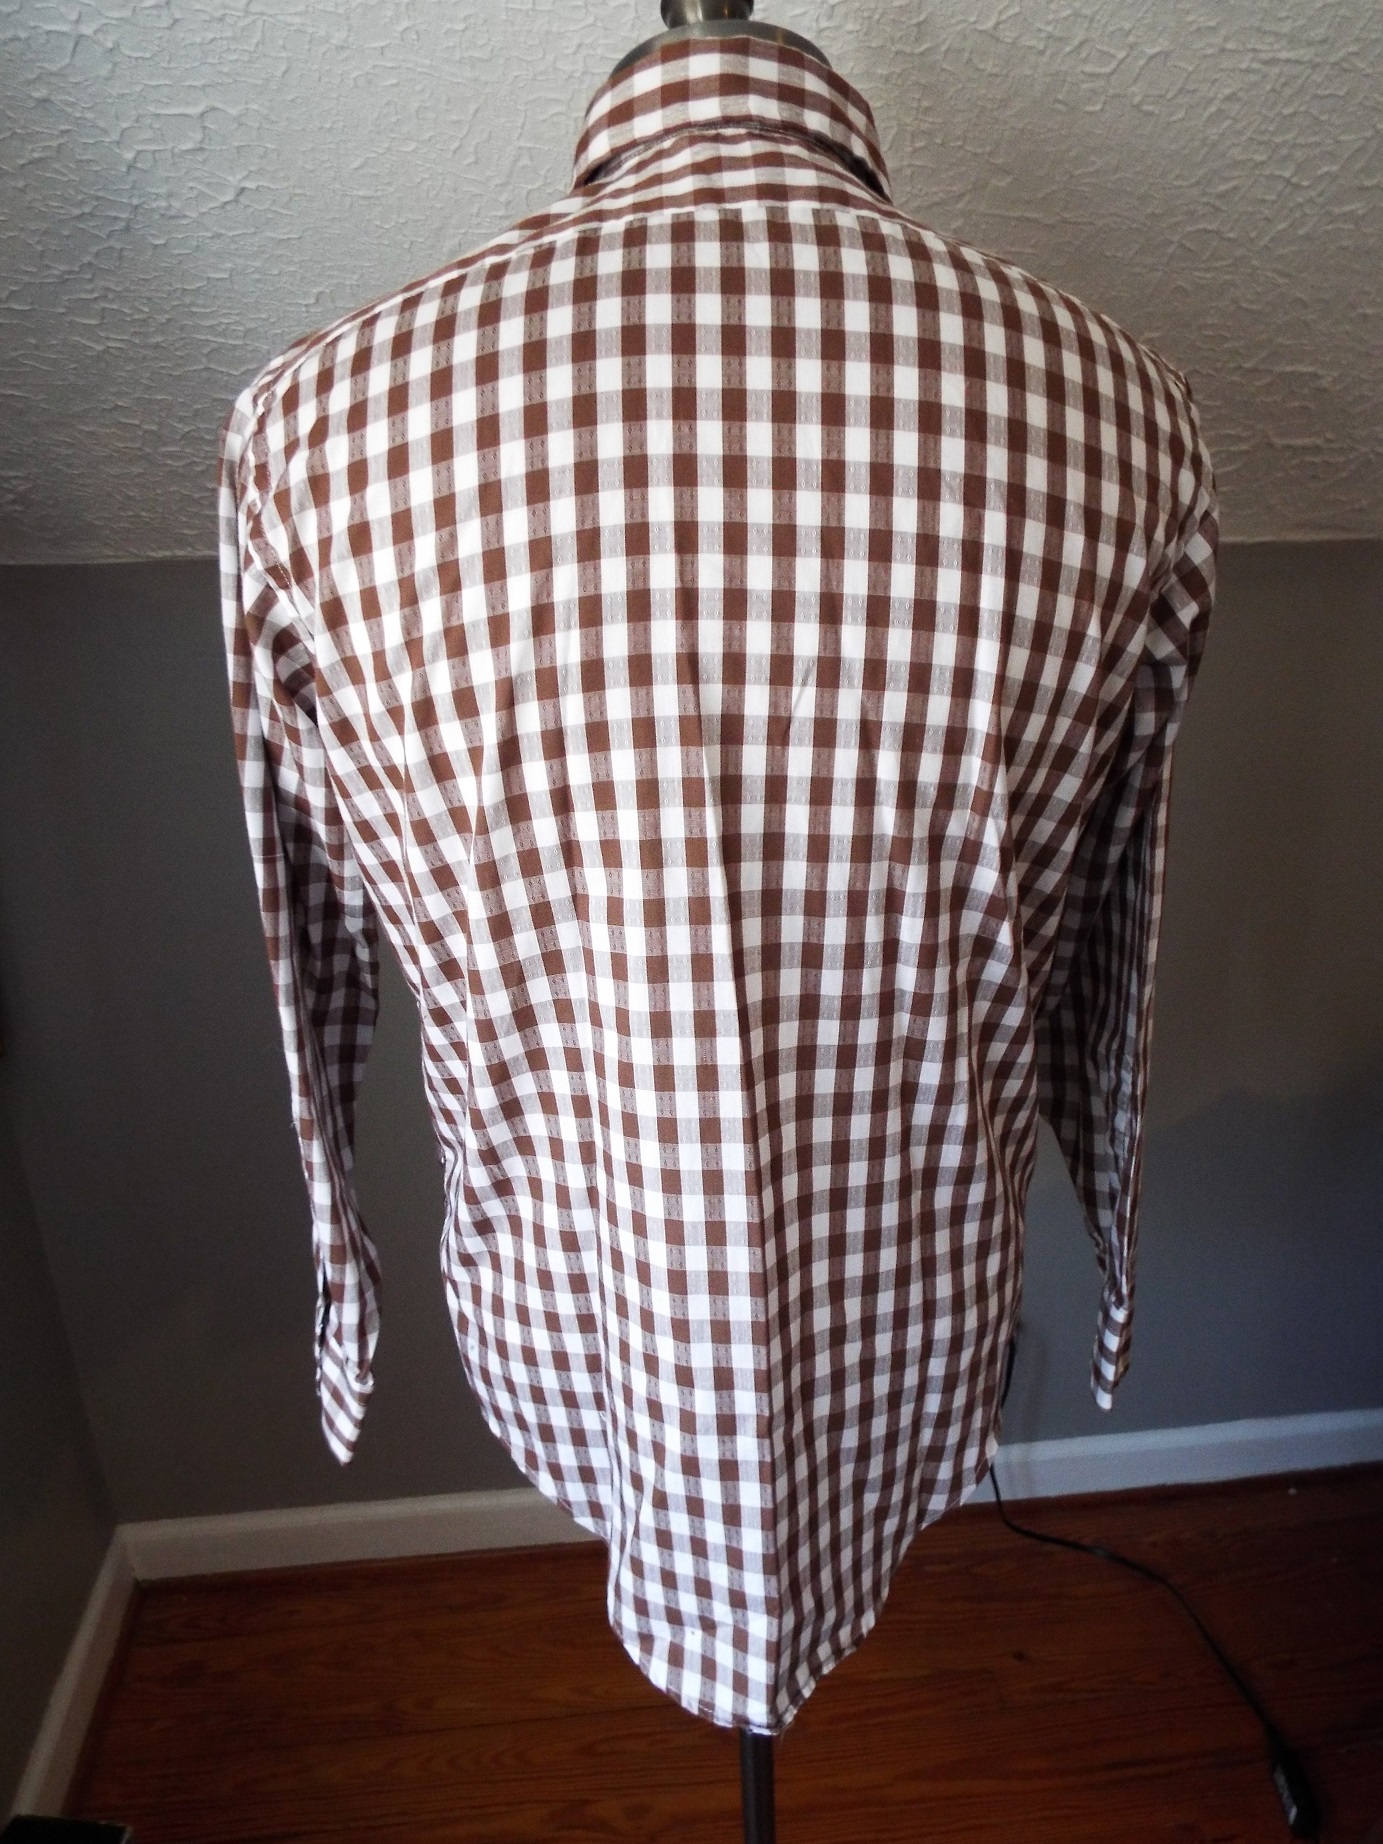 Vintage Long Sleeve Button Down Brown and White Striped Shirt